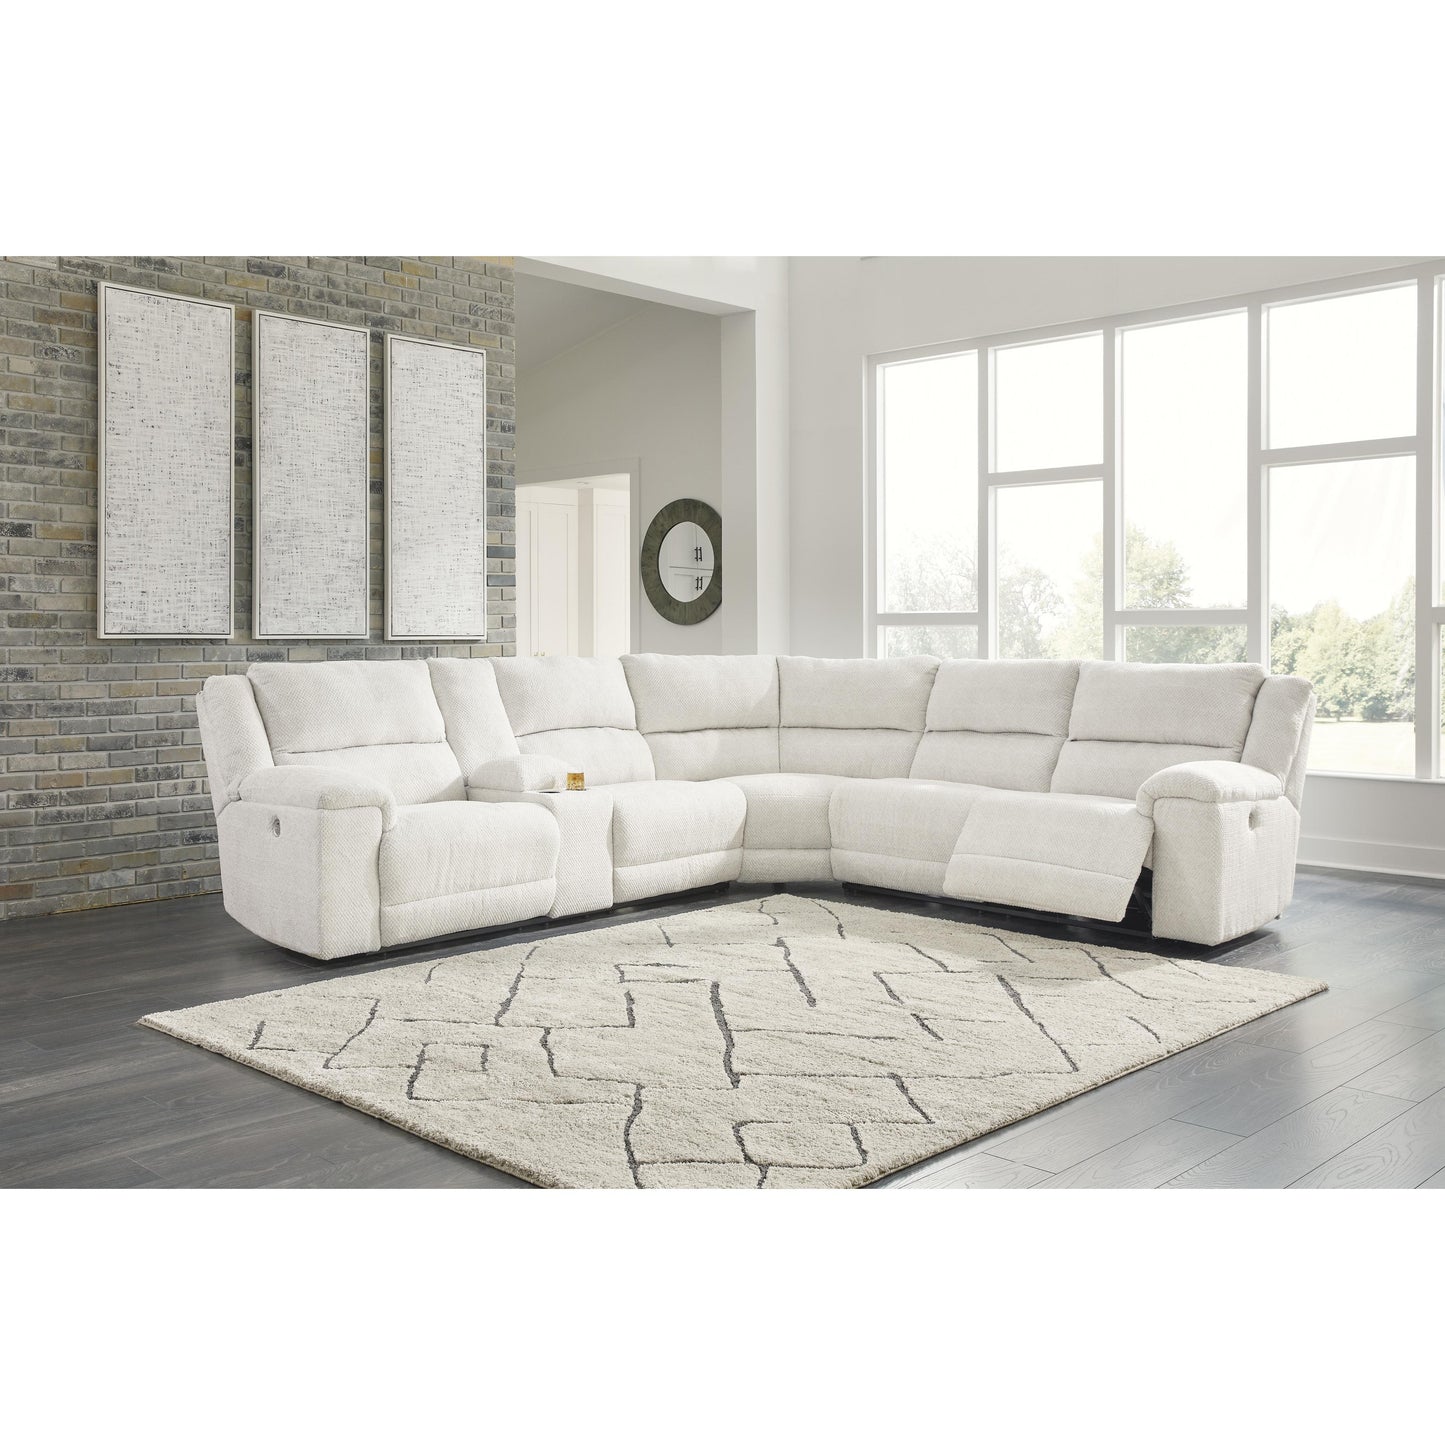 Signature Design by Ashley Keensburg Power Reclining Fabric 3 pc Sectional 6180701/6180777/6180775 IMAGE 3